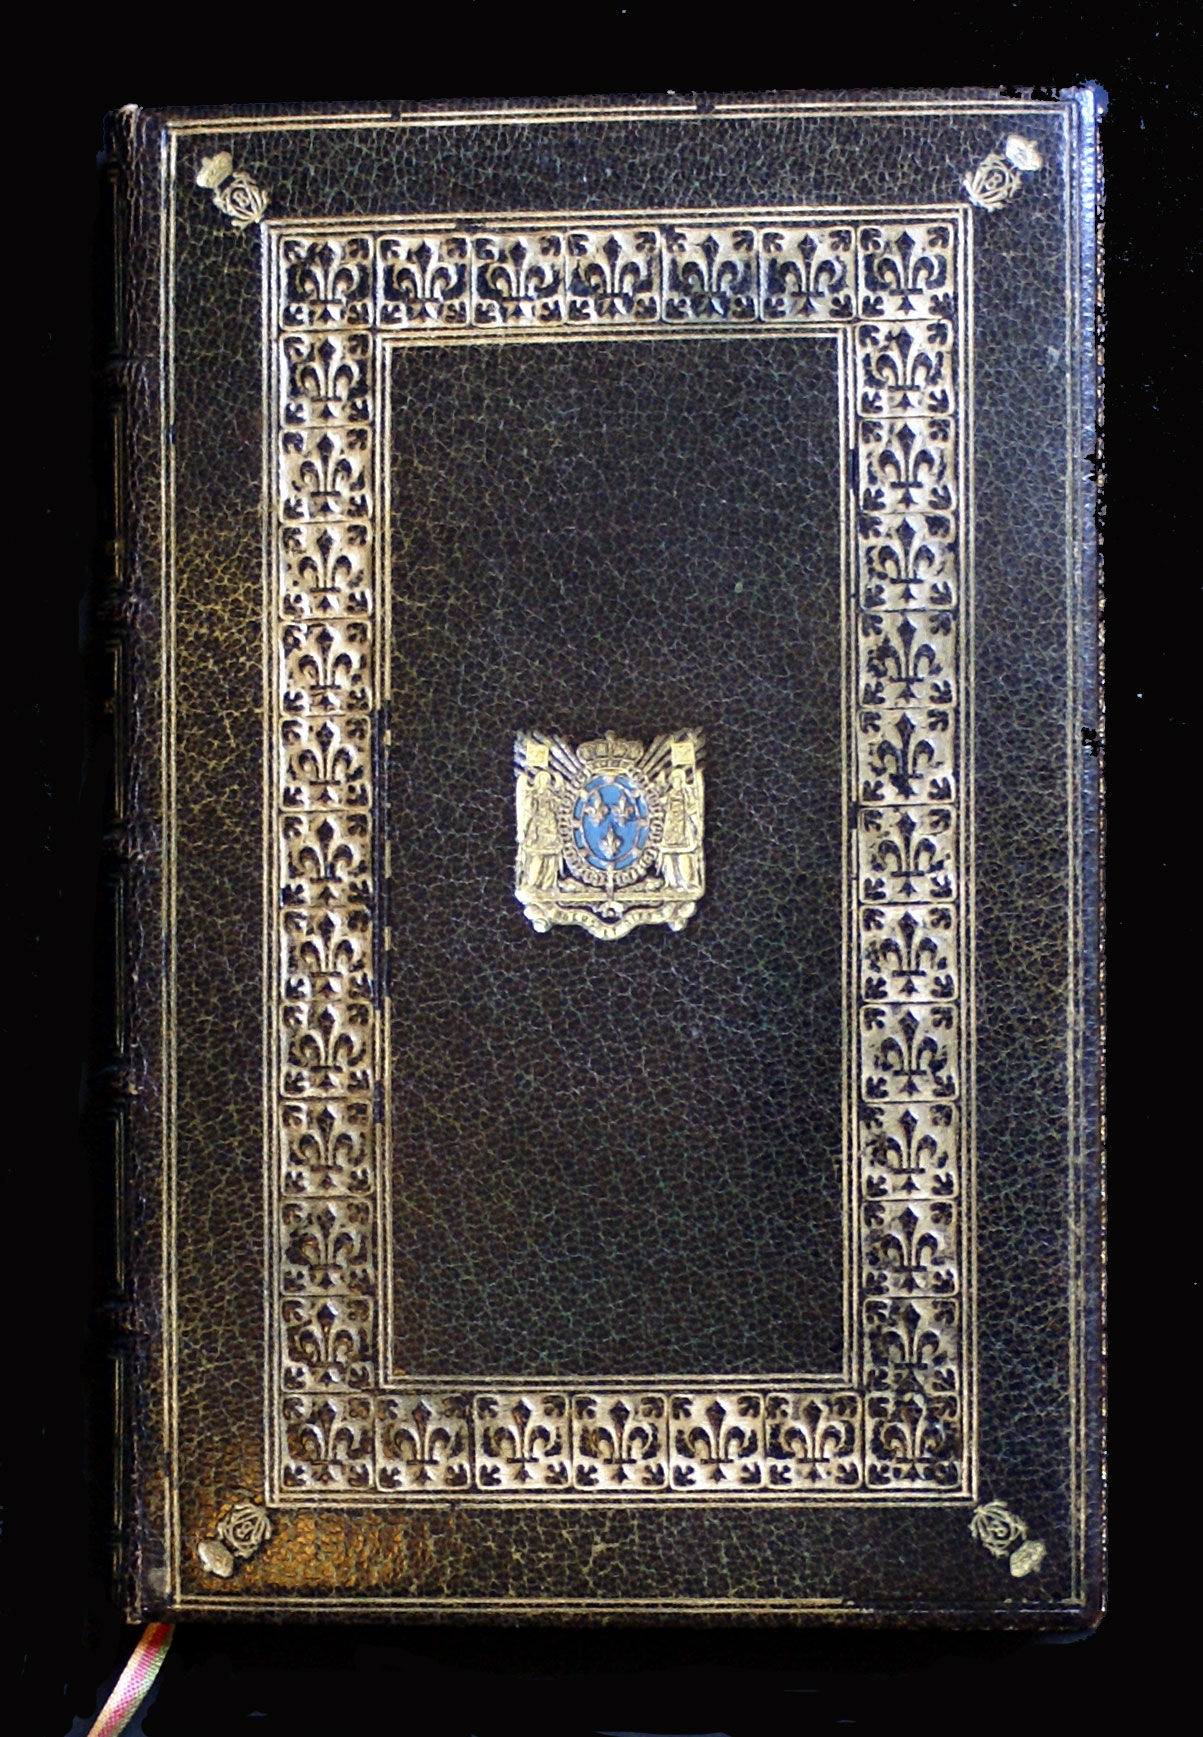 c 1526 Book of Hours - Complete - Royal Provenance